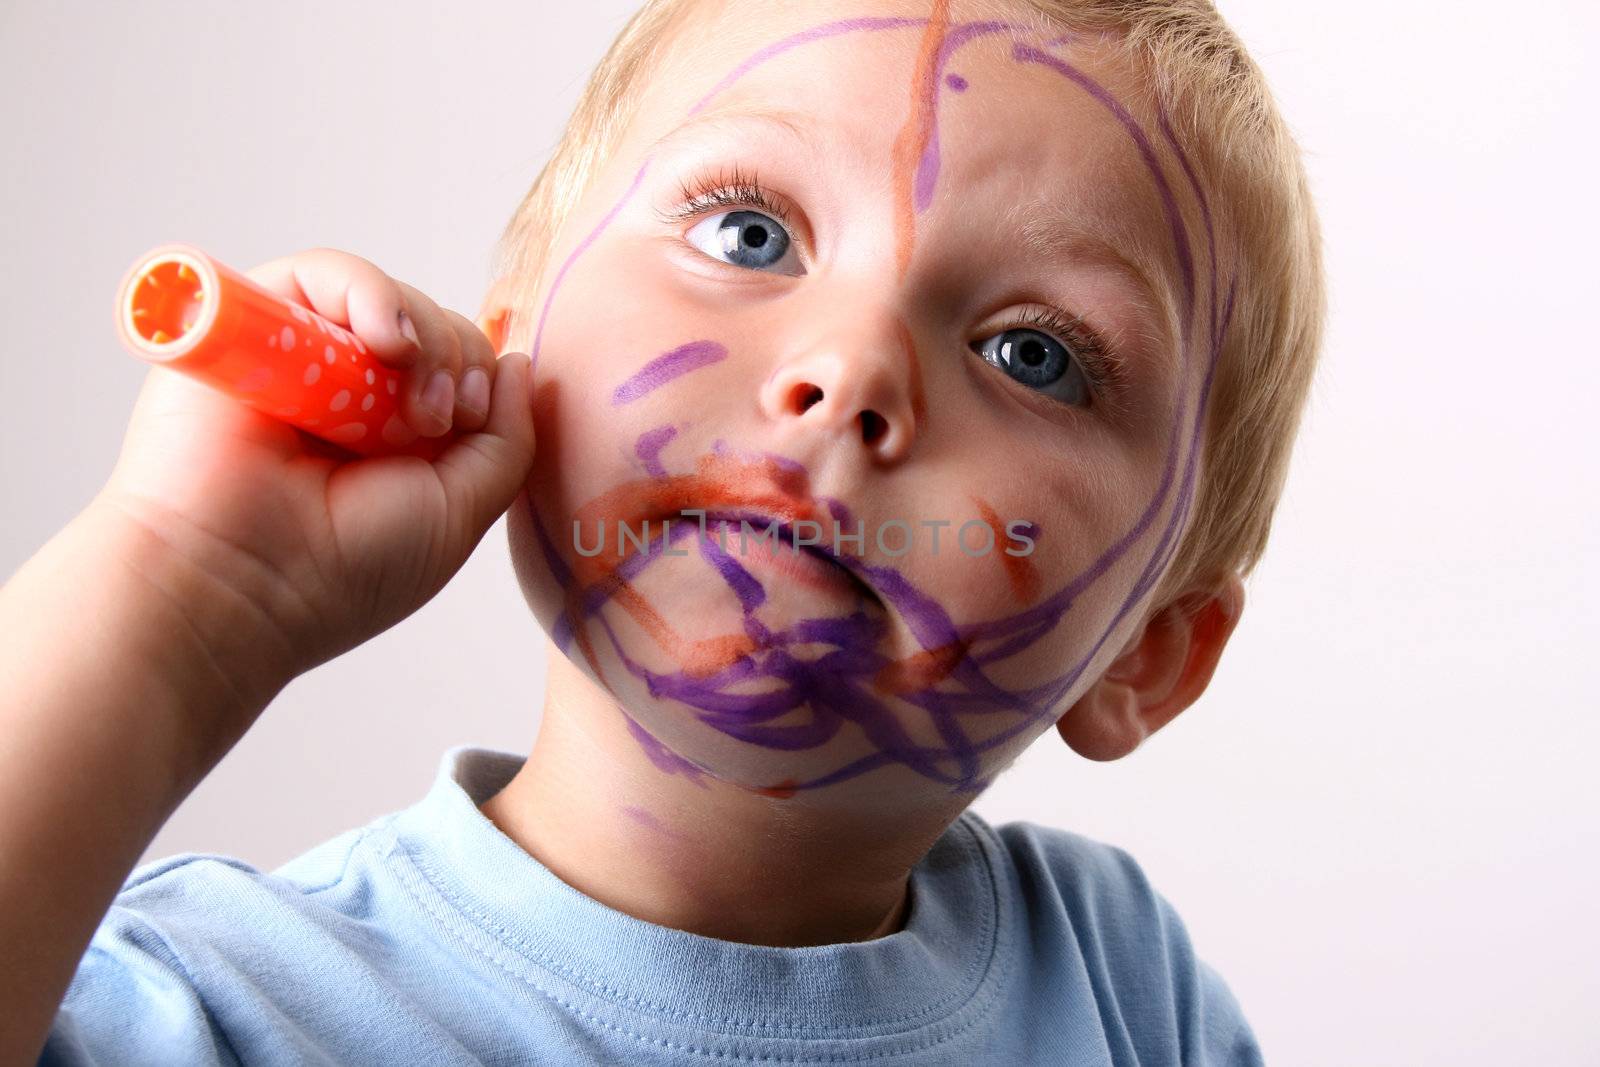 Laughing Toddler playing with colored pens making a mess